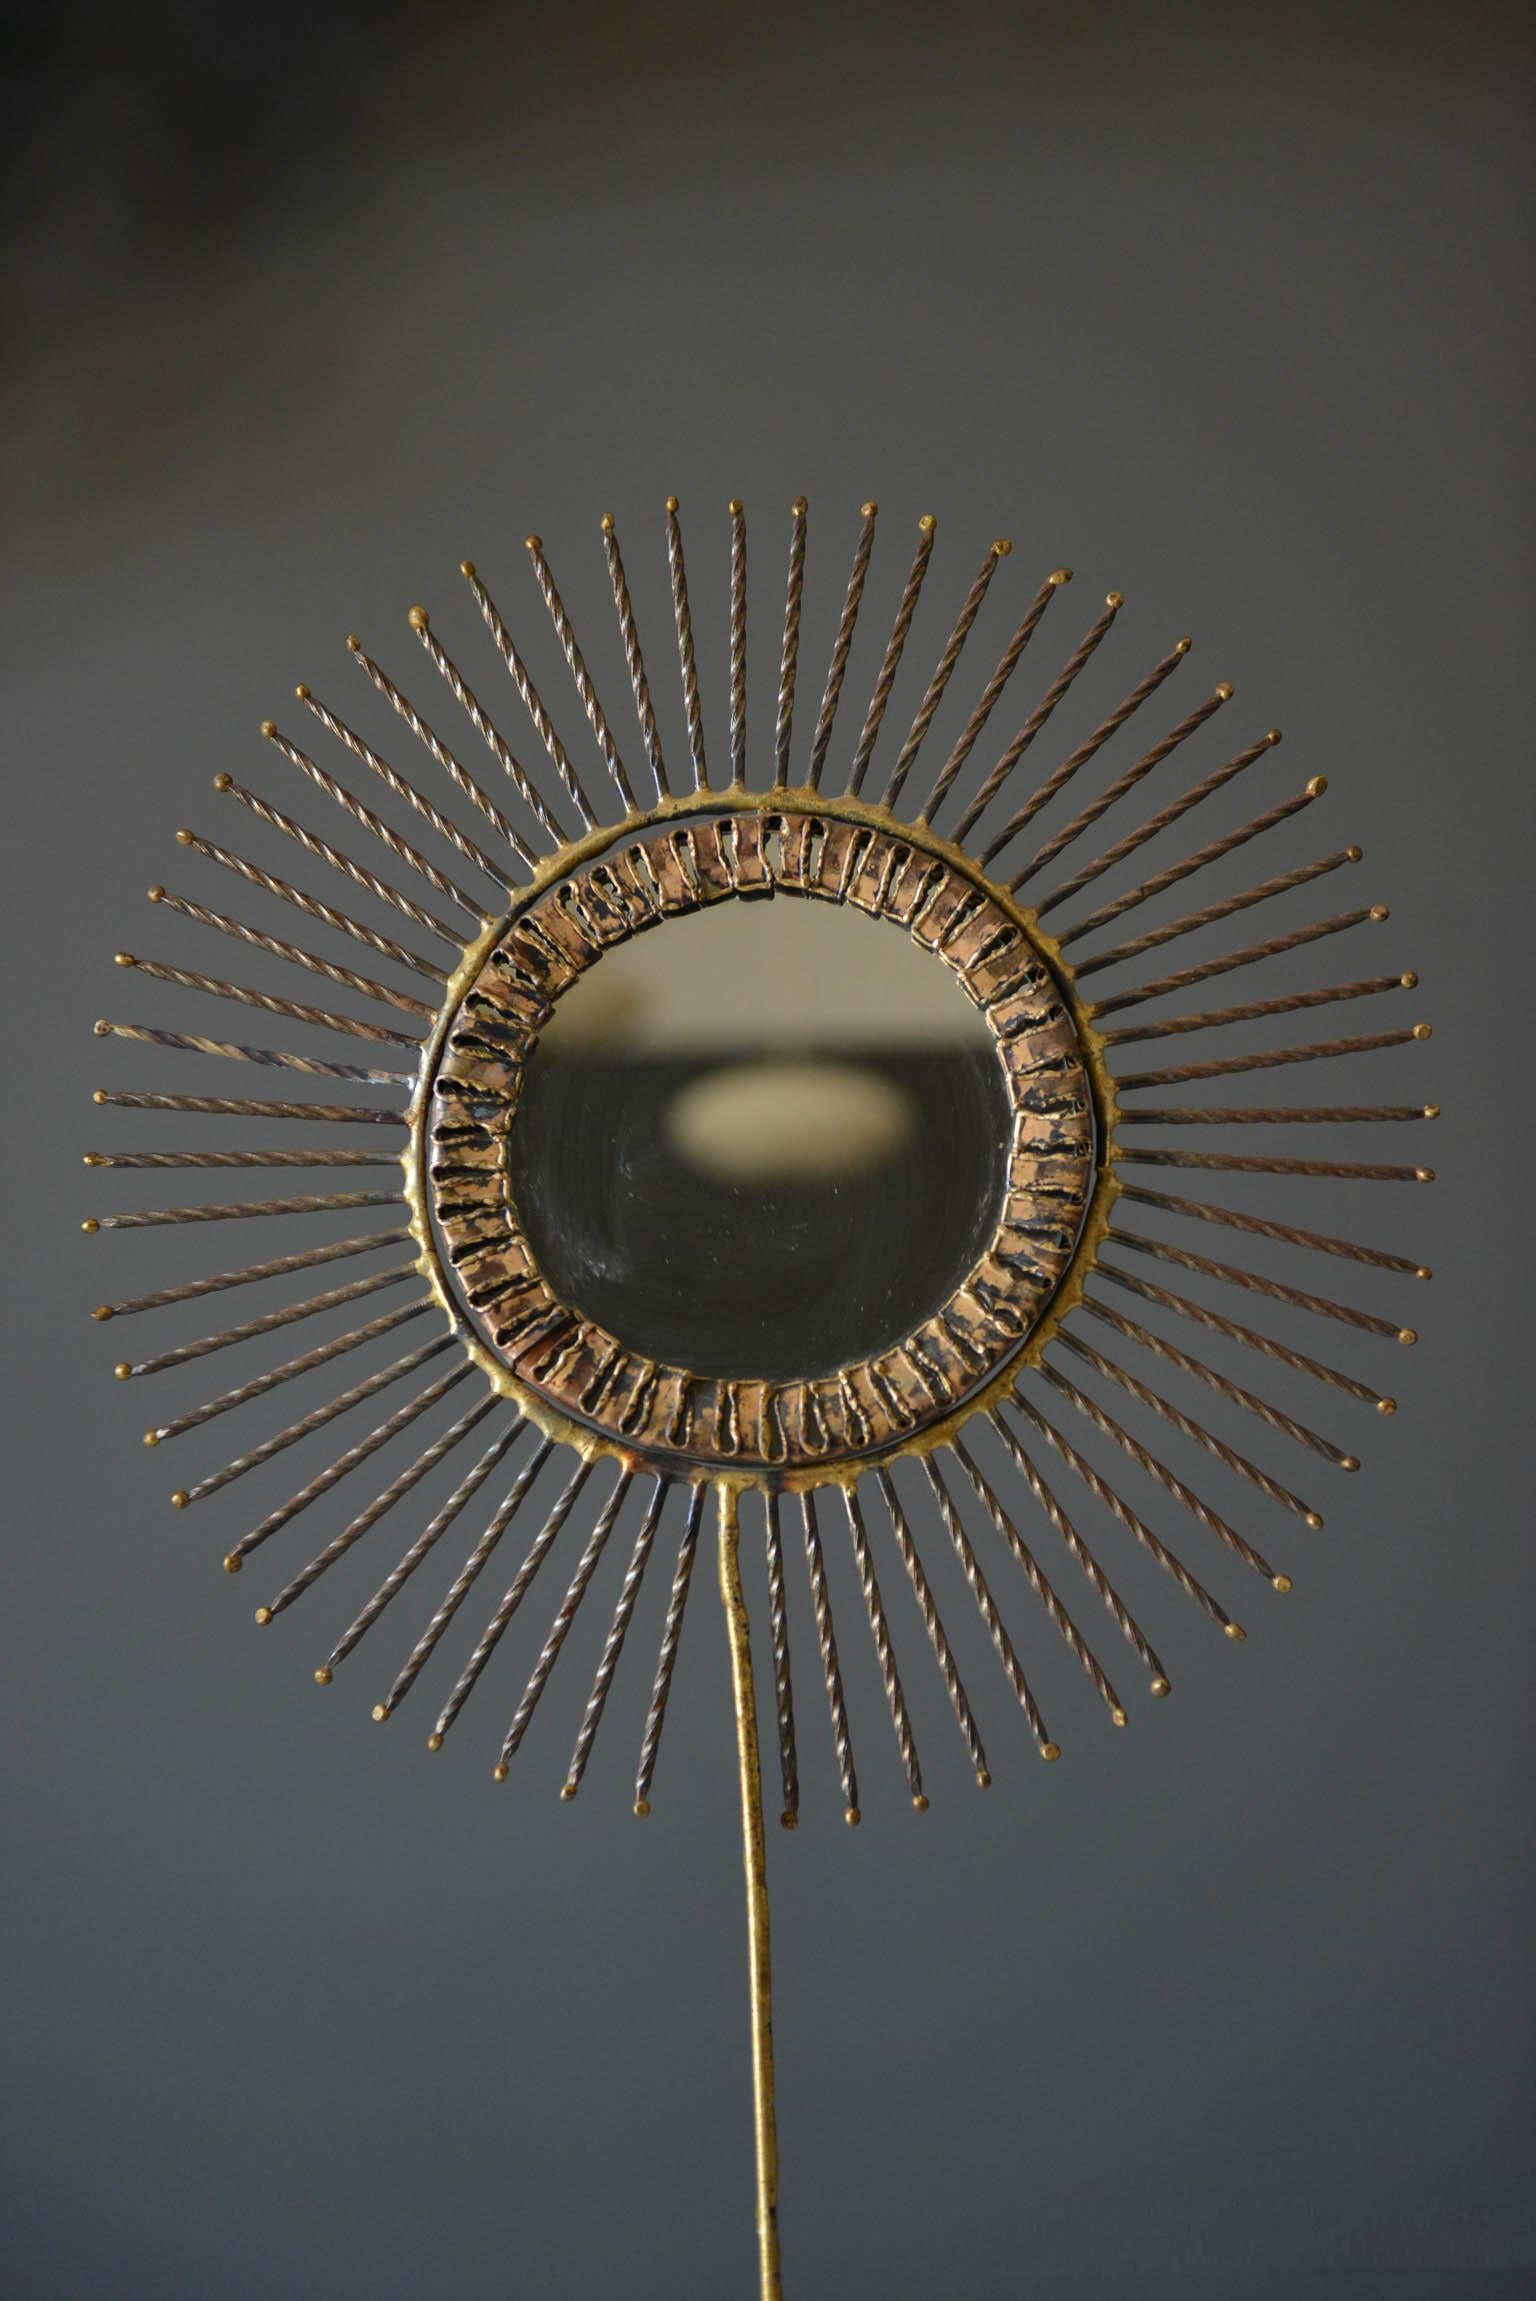 Rare Curtis Jere double-sided brass sunburst mirror, 1968. Signed by the artist. Excellent vintage condition. Rare, some say these were never actually put into full production but created as a custom order for a few clients. Mirror is double sided